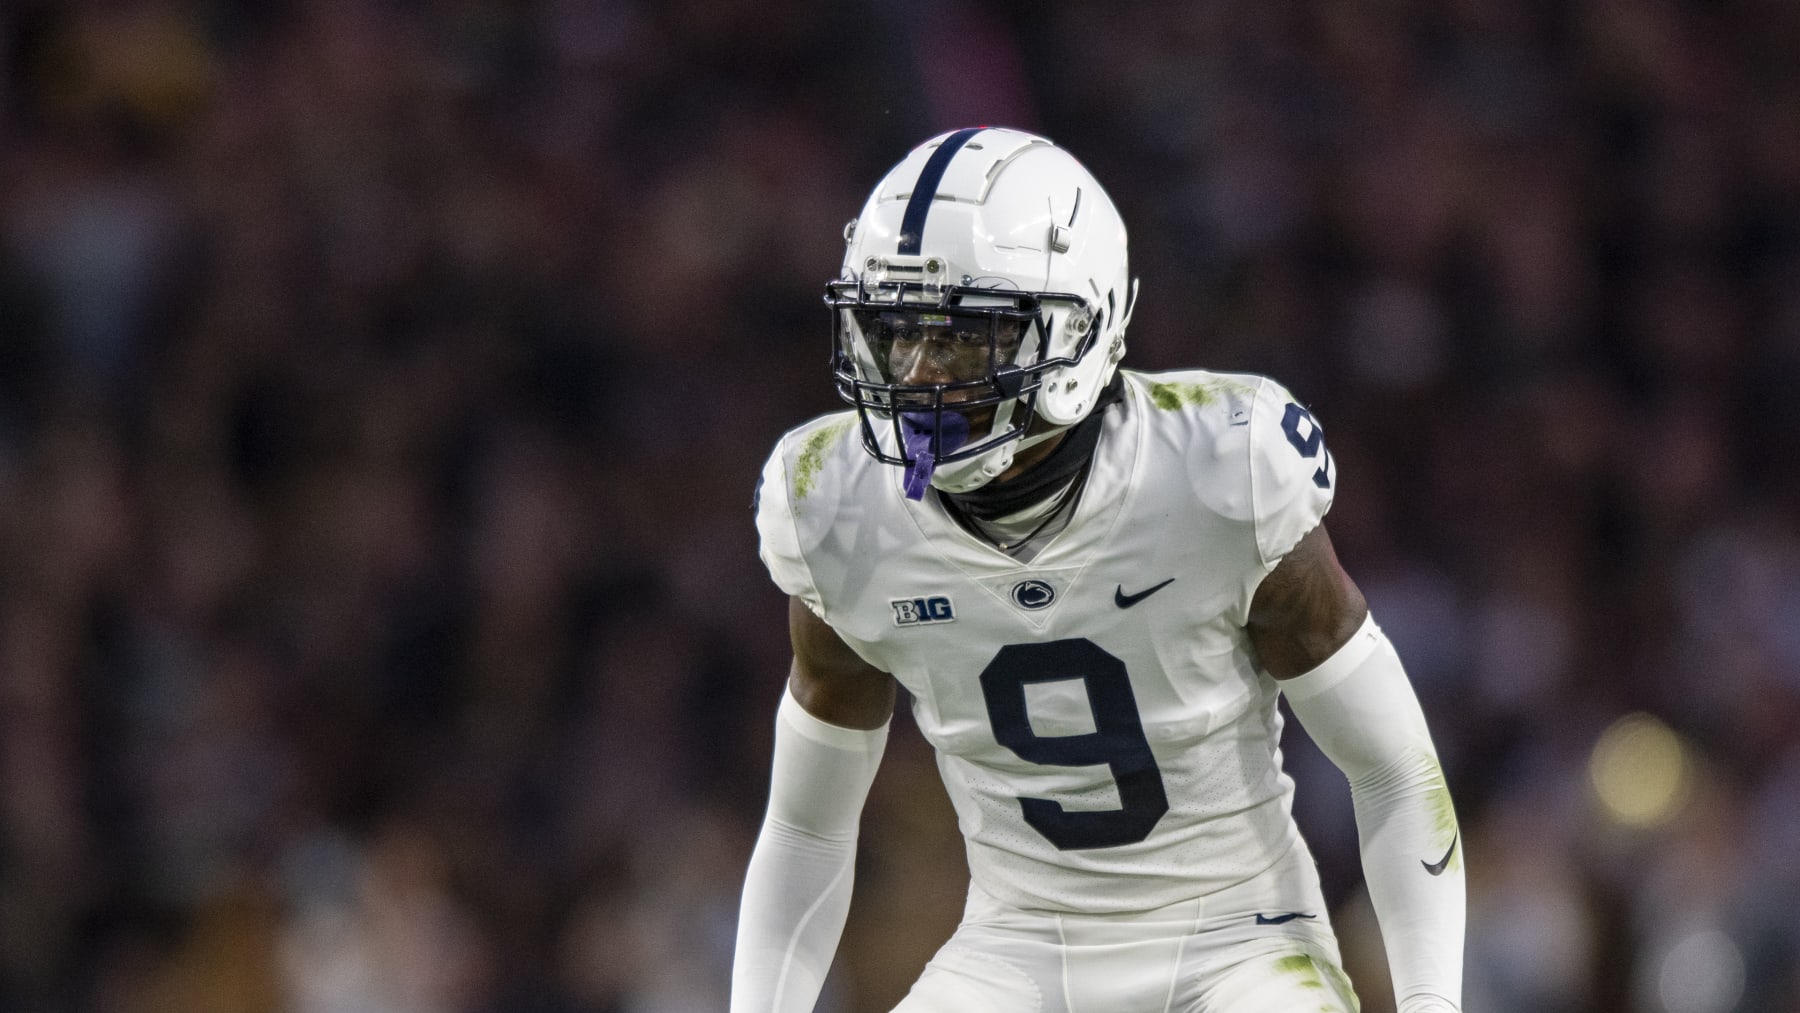 NFL Draft 2023 rumors and news: List of draft attendees has some